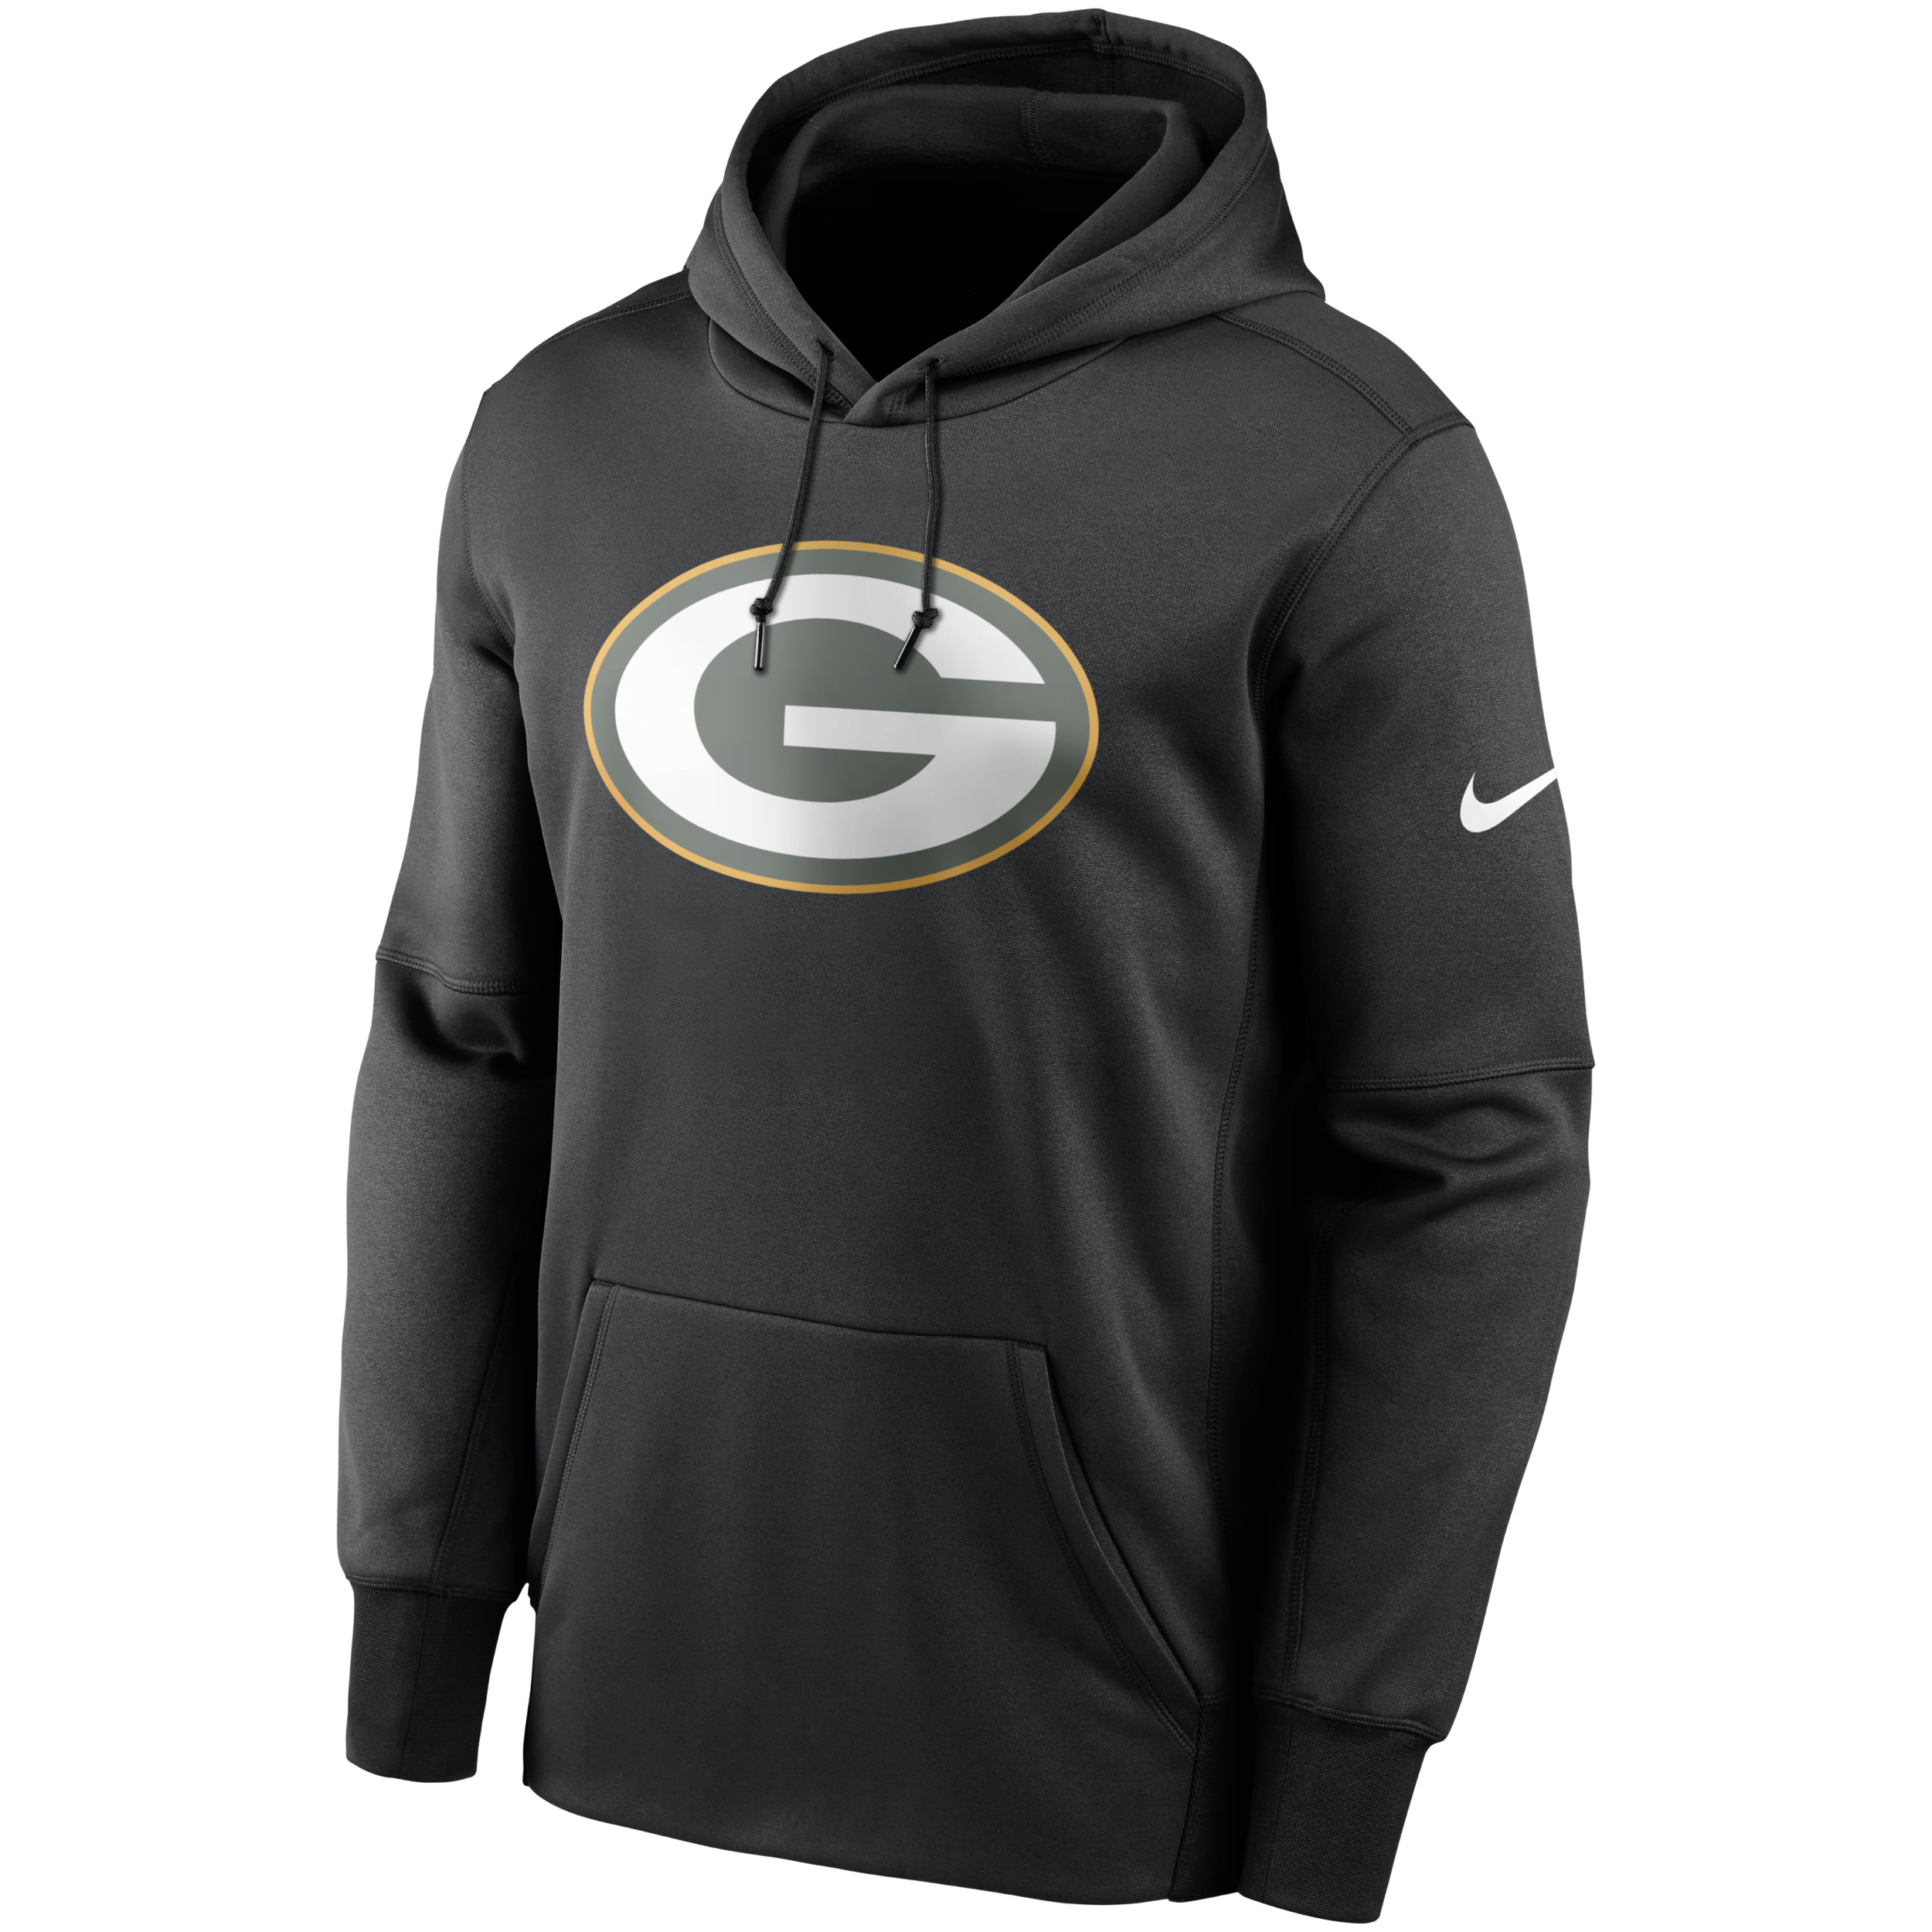 Nike Therma Prime Logo (NFL Green Bay Packers) Sudadera con capucha - Hombre - Verde